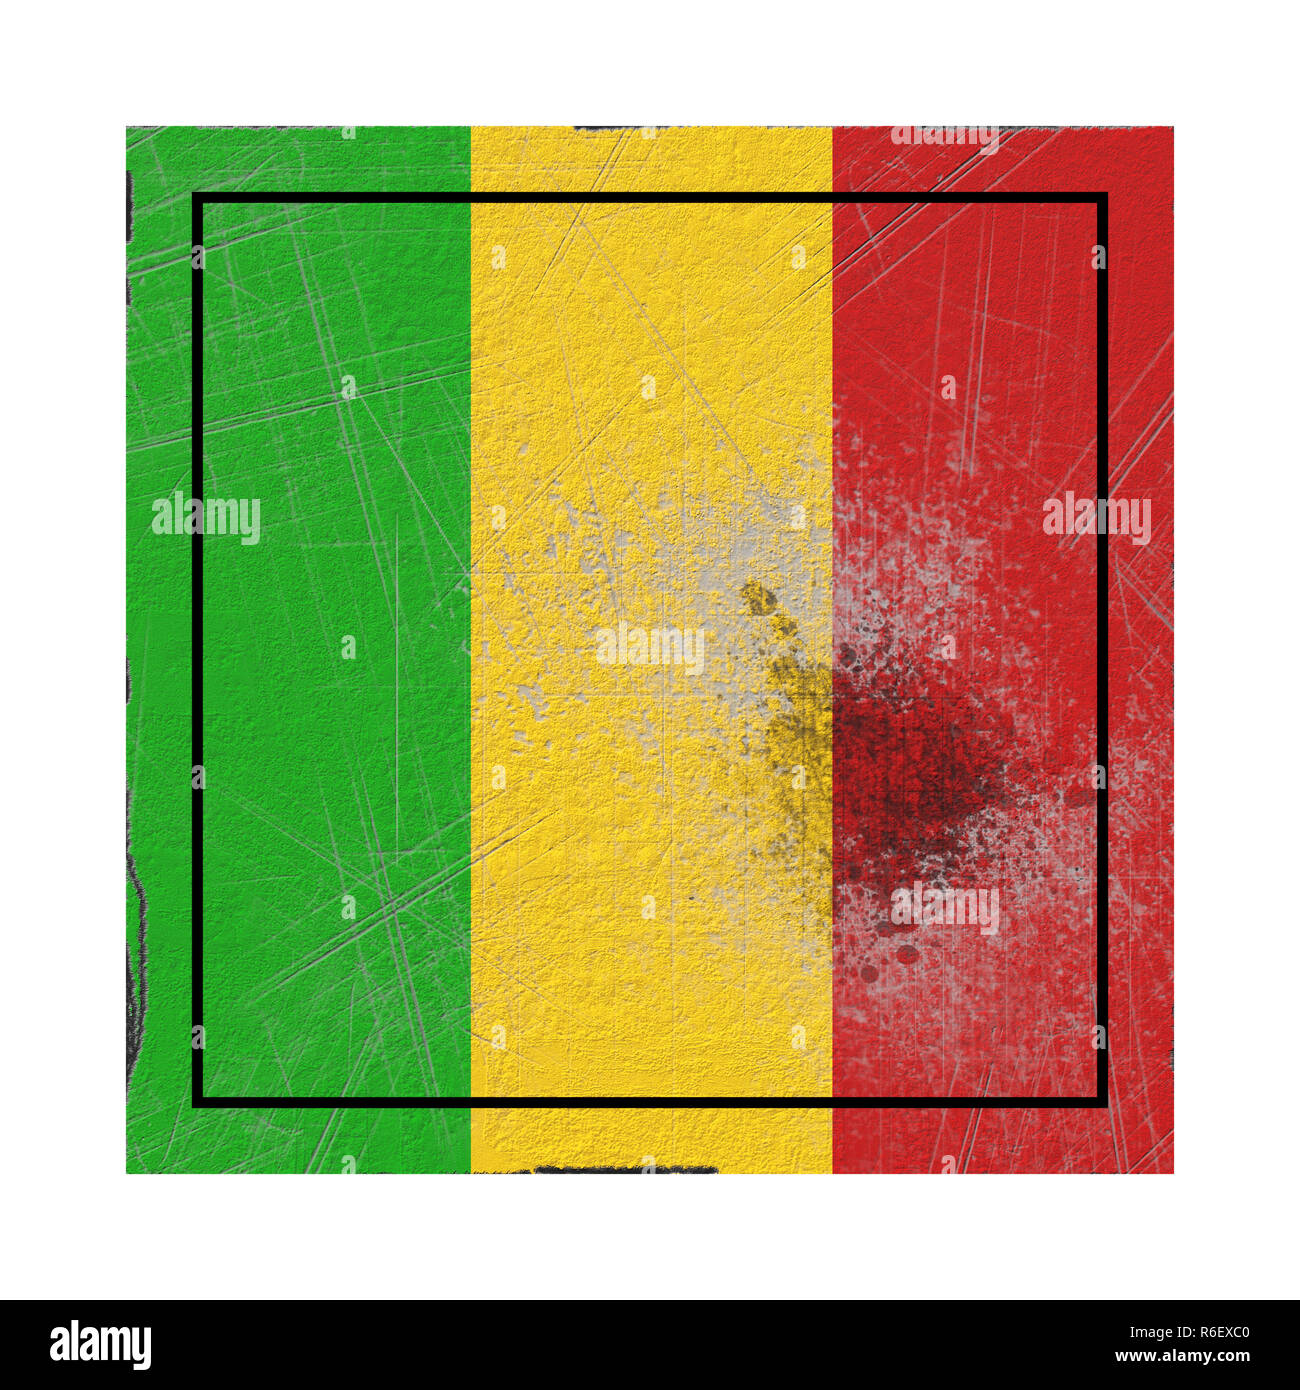 3d rendering of an old Mali flag in a concrete square Stock Photo